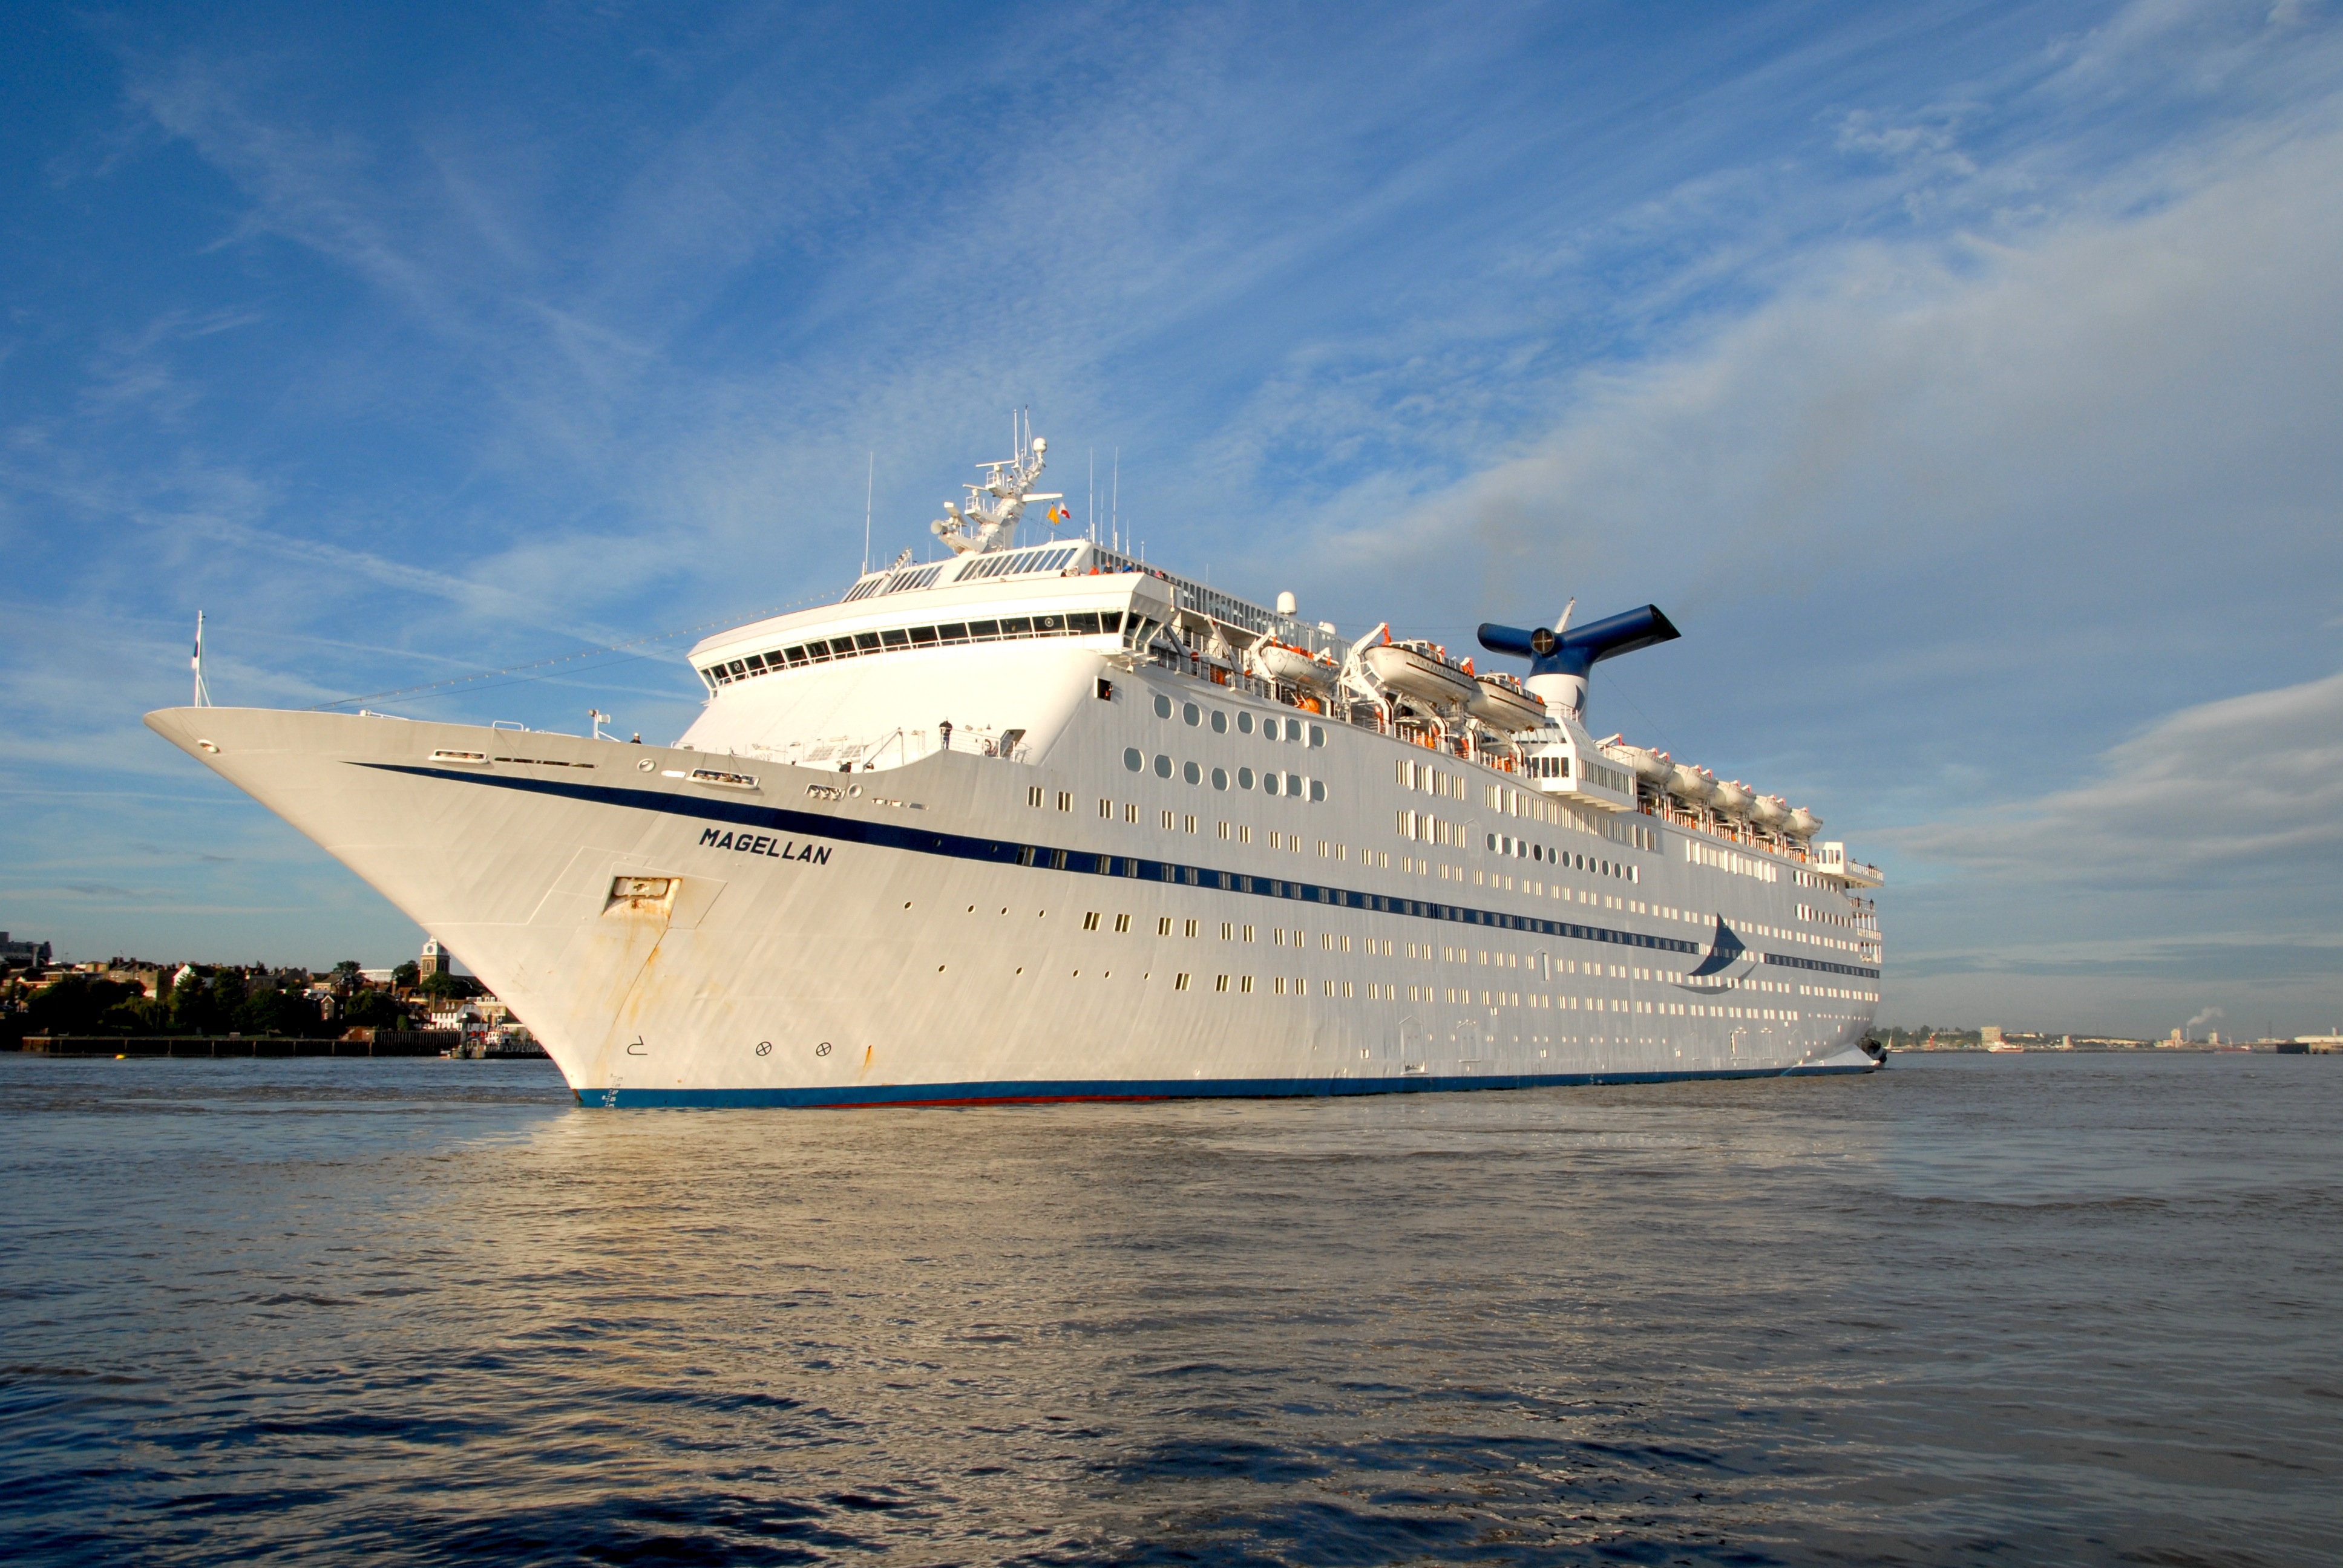 The majestic Magellan will be taking Courier readers on an exclusive tour of Norway and the Scottish Isles in June 2020.